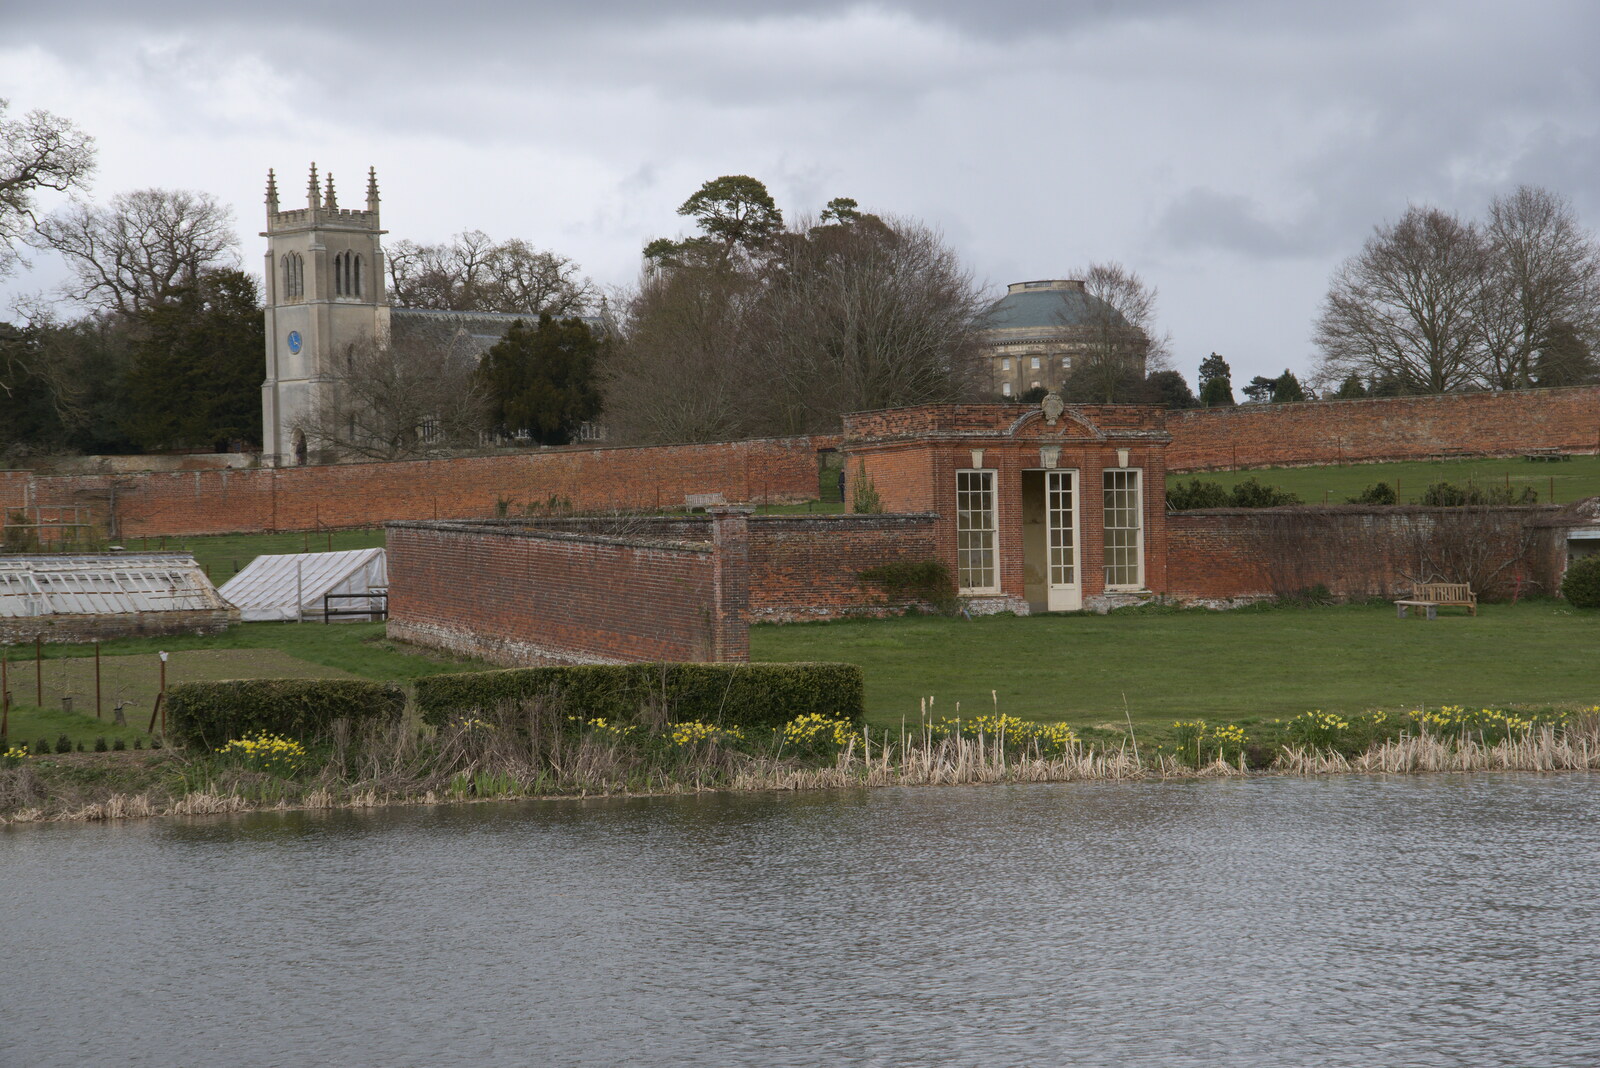 The church, summer house and rotunda all in one shot from A Return to Ickworth House, Horringer, Suffolk - 11th April 2021